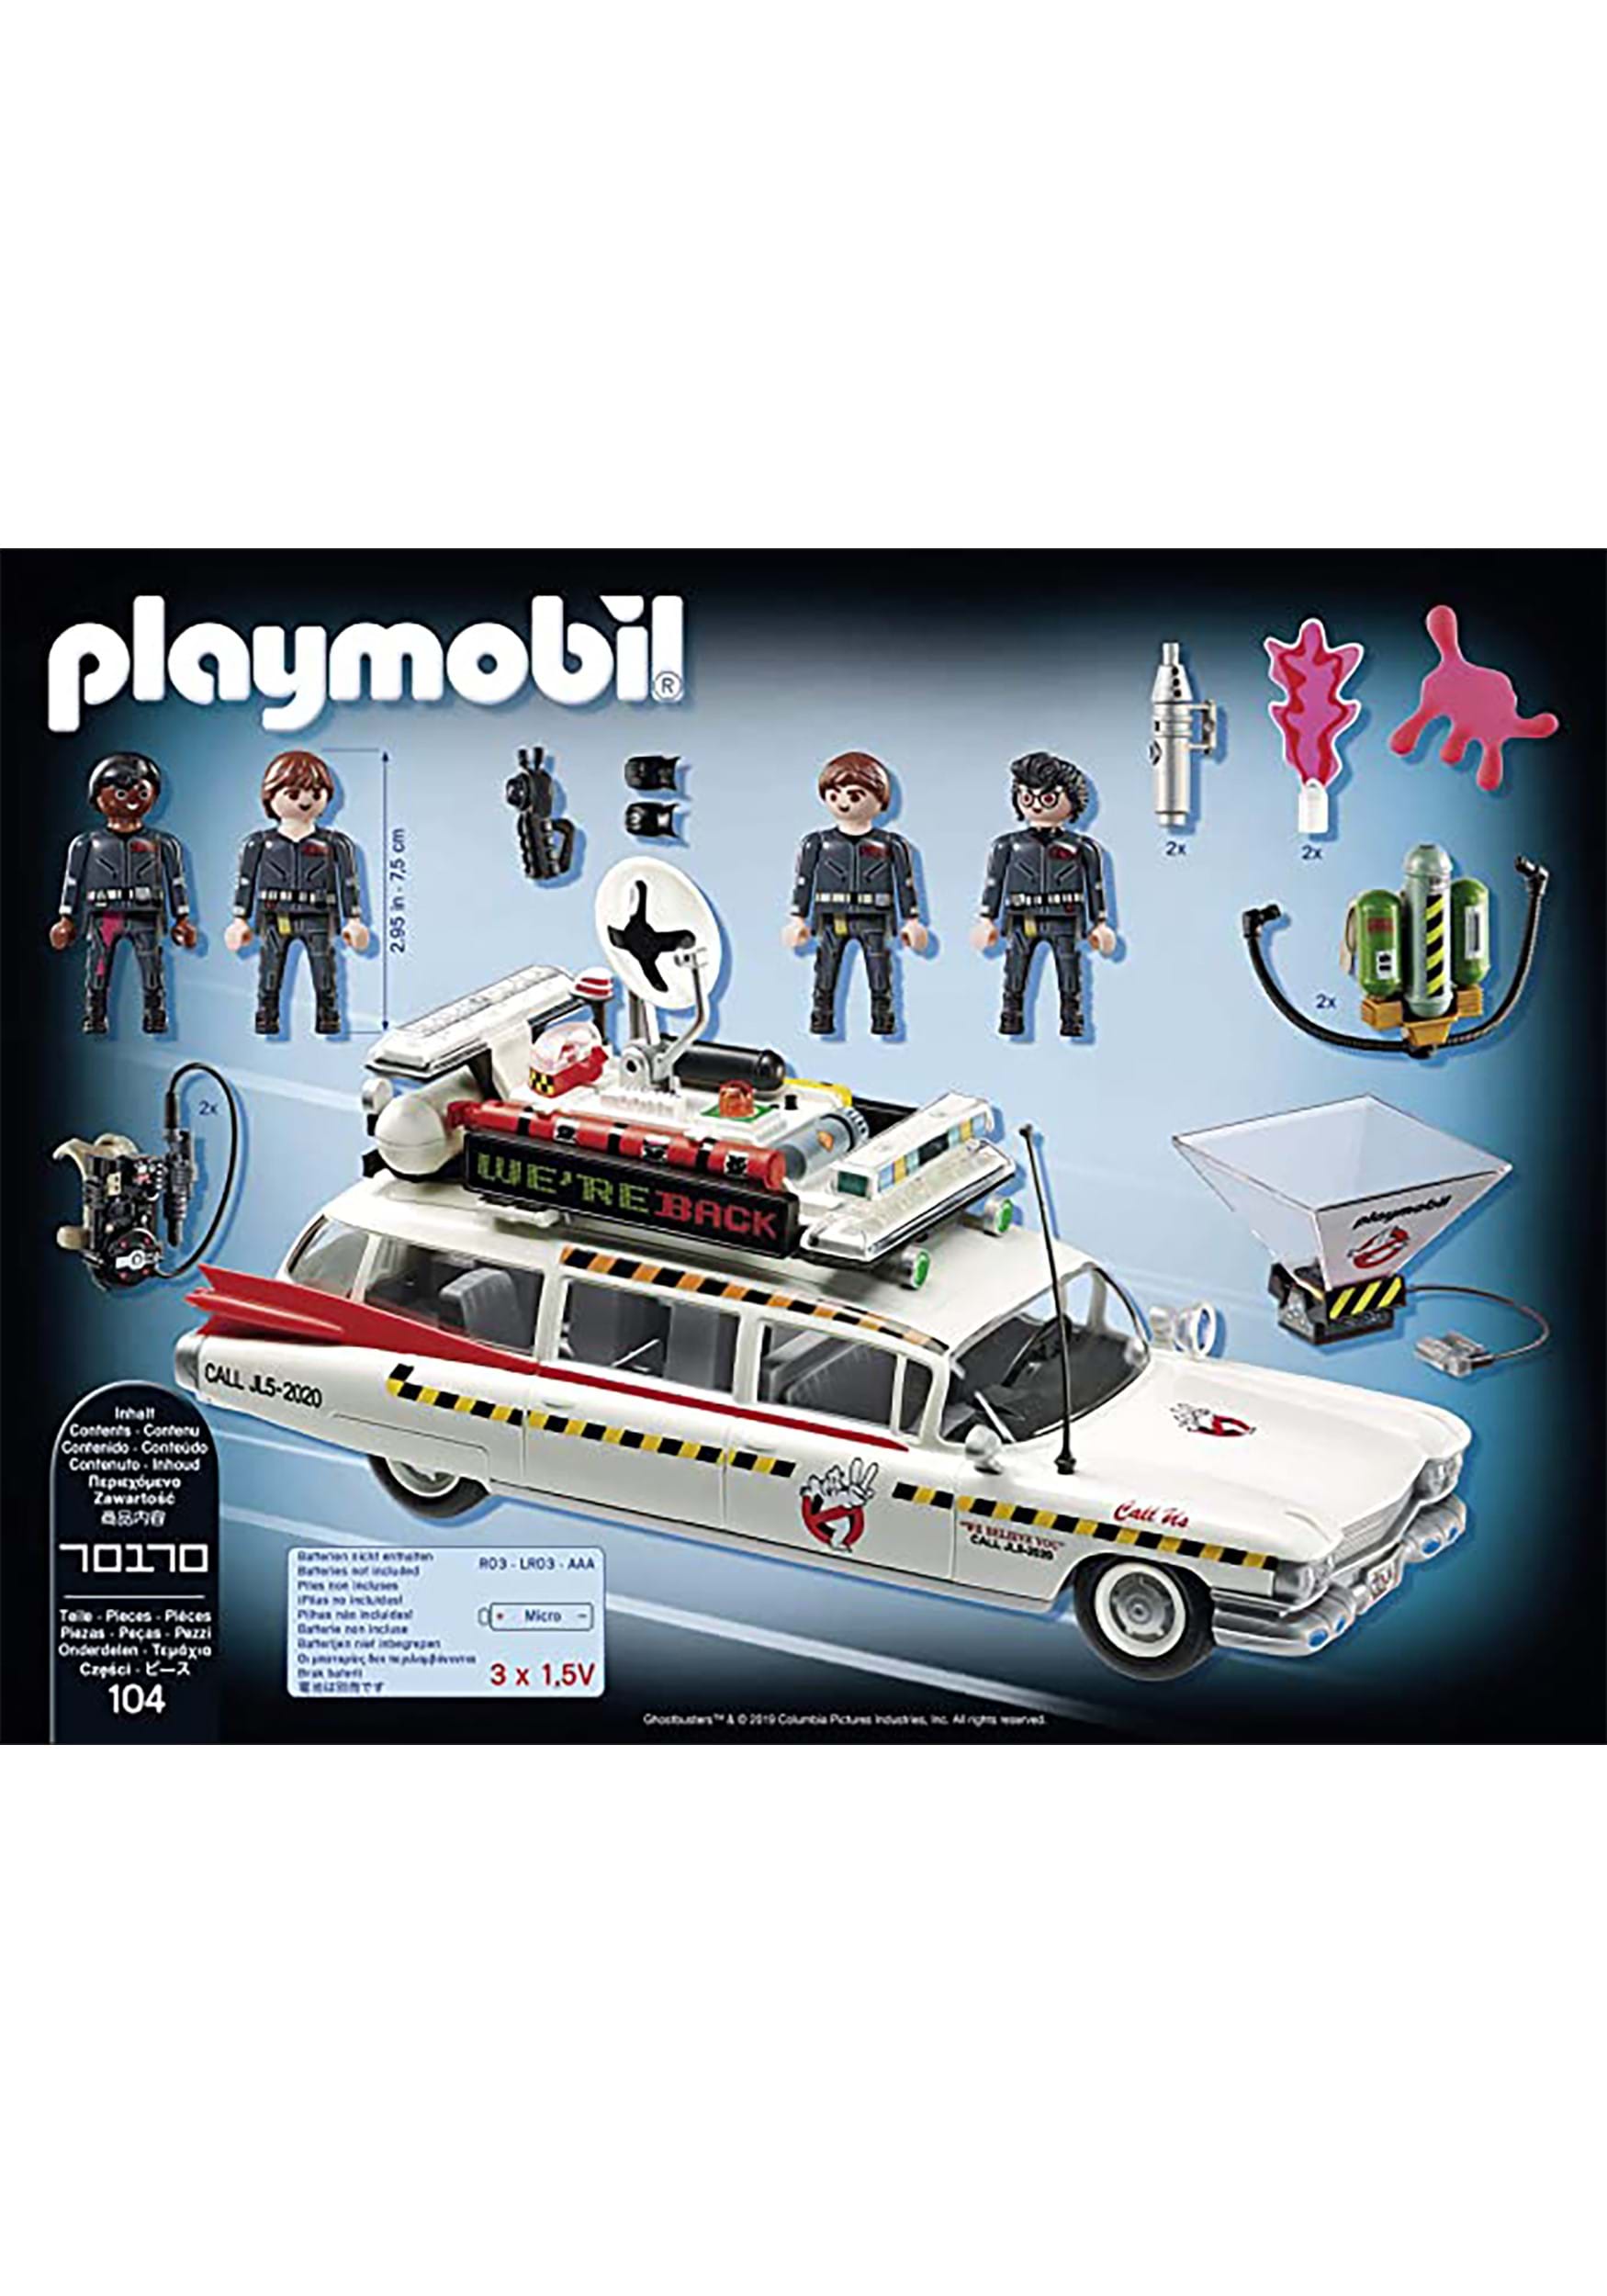 Chemist Complain atomic Ghostbusters Ecto-1A Playmobil Vehicle